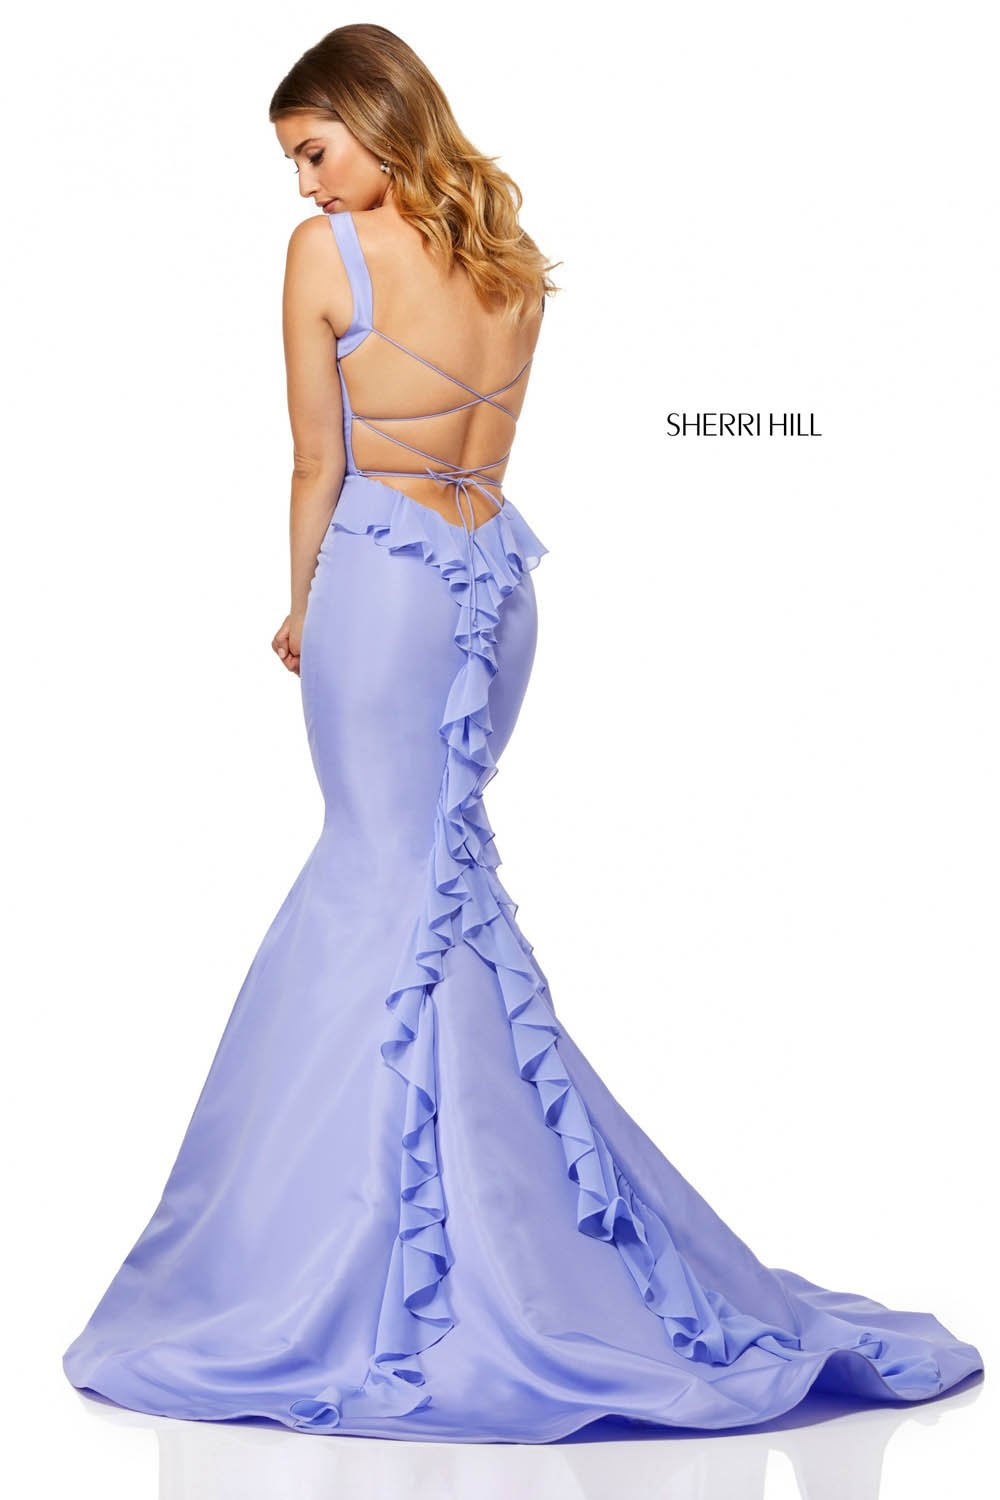 Sherri Hill 52465 dress images in these colors: Light Blue, Lilac, Aqua, Yellow, Red.